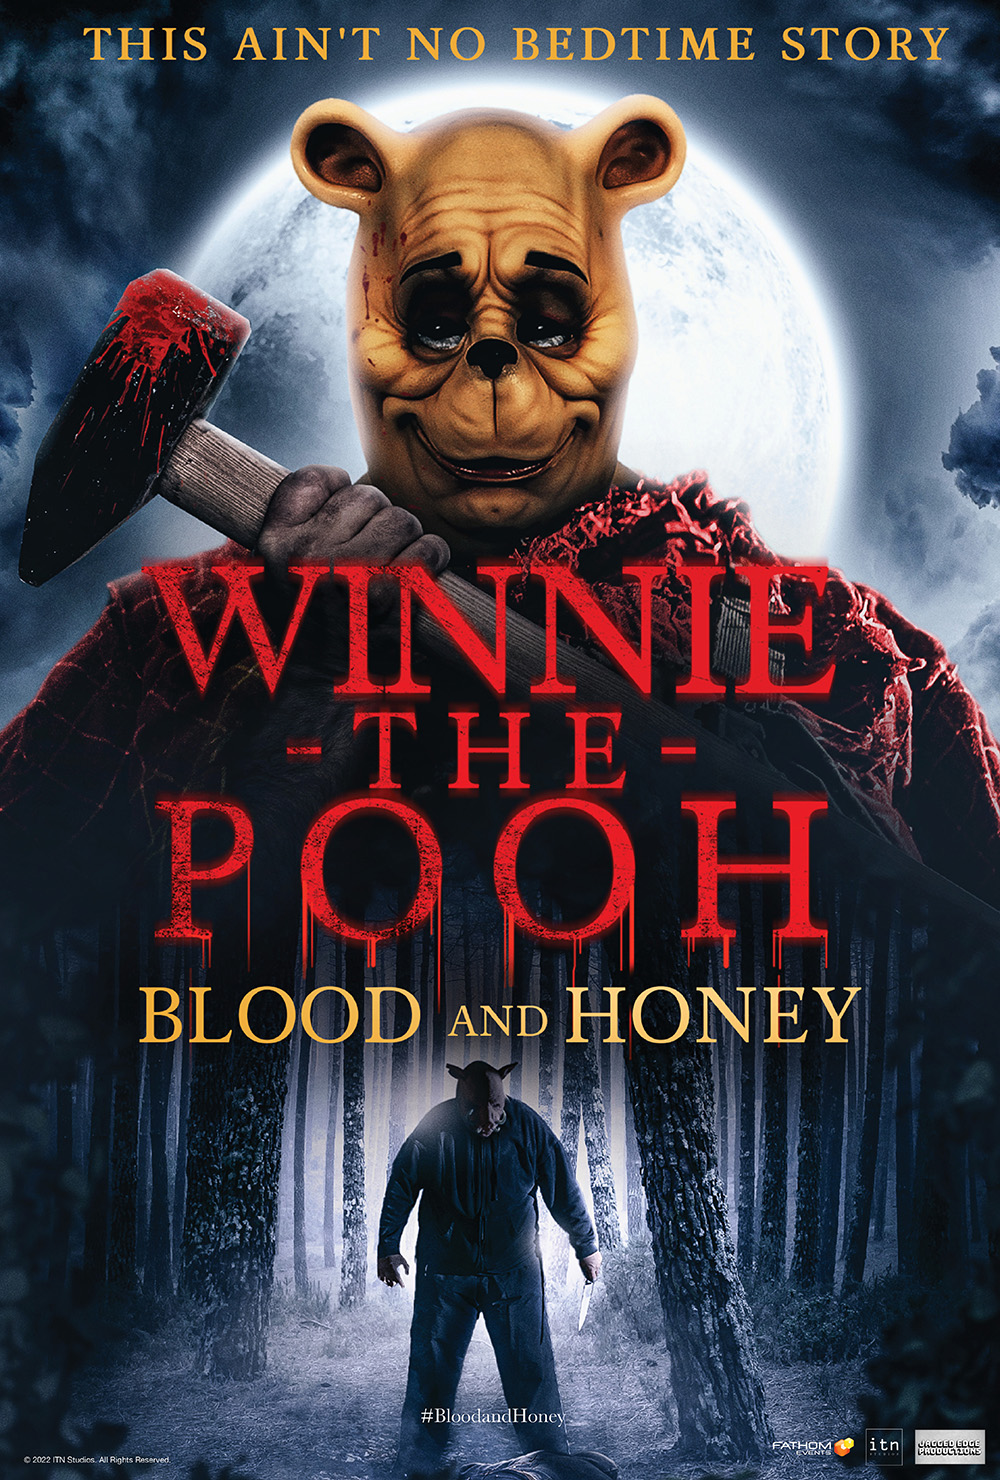 “Winnie the Pooh: Blood and Honey” review